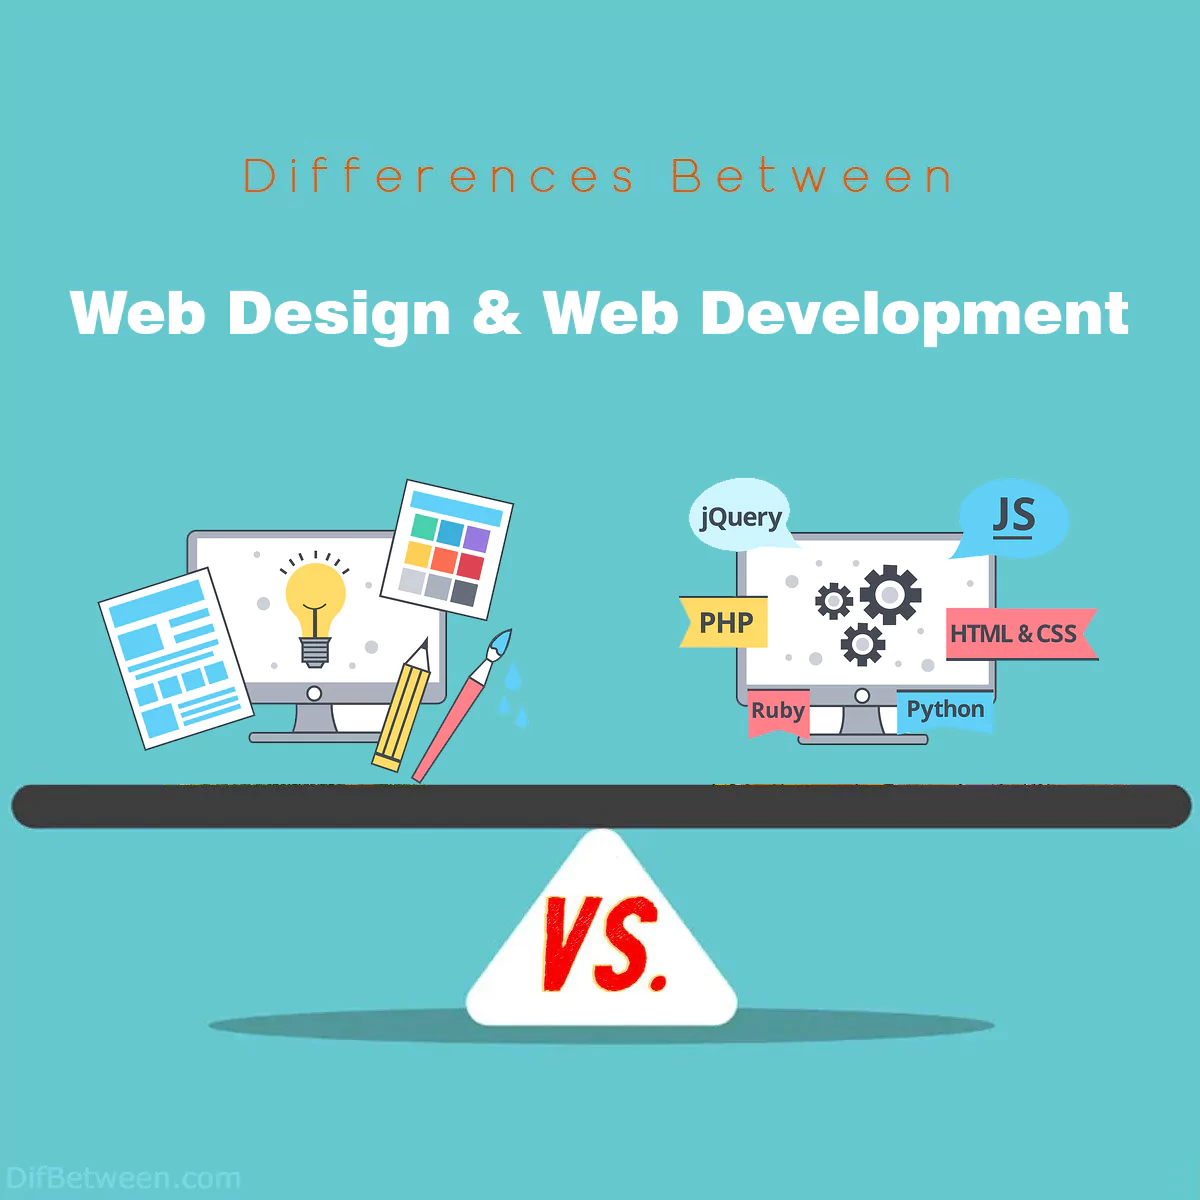 Differences Between Web Design and Web Development